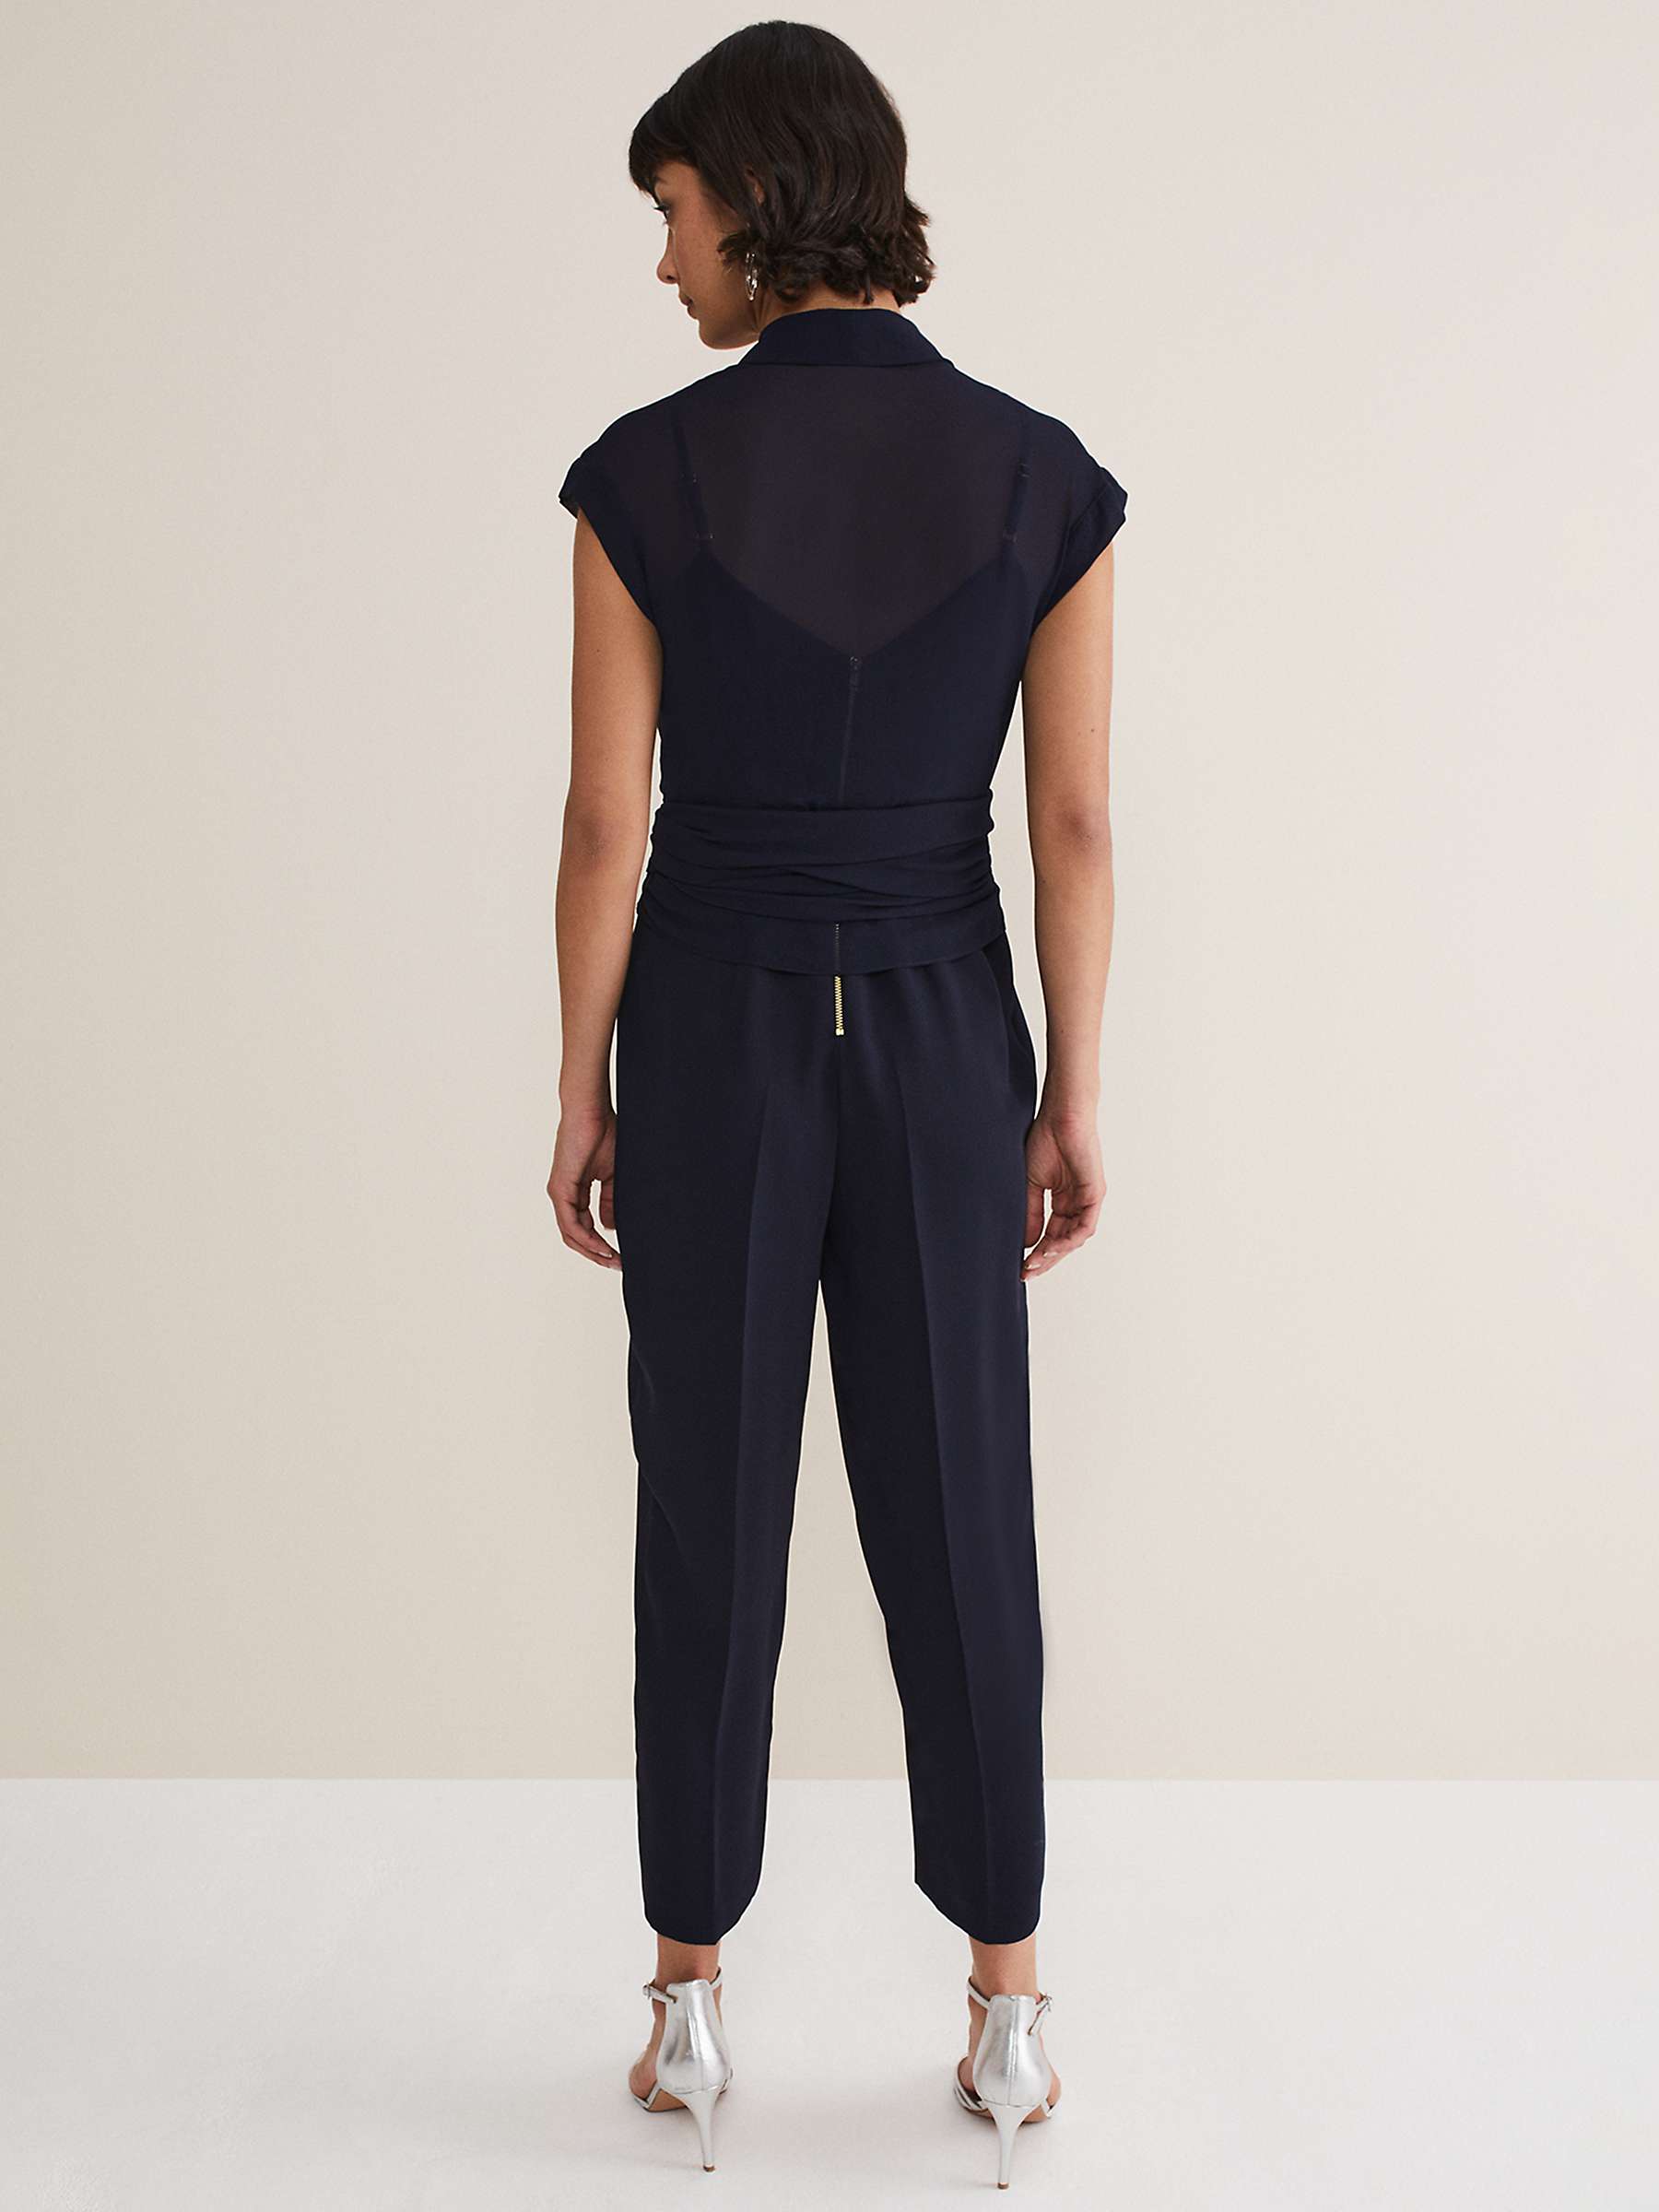 Buy Phase Eight Leonora Chiffon Overlay Jumpsuit, Navy Online at johnlewis.com